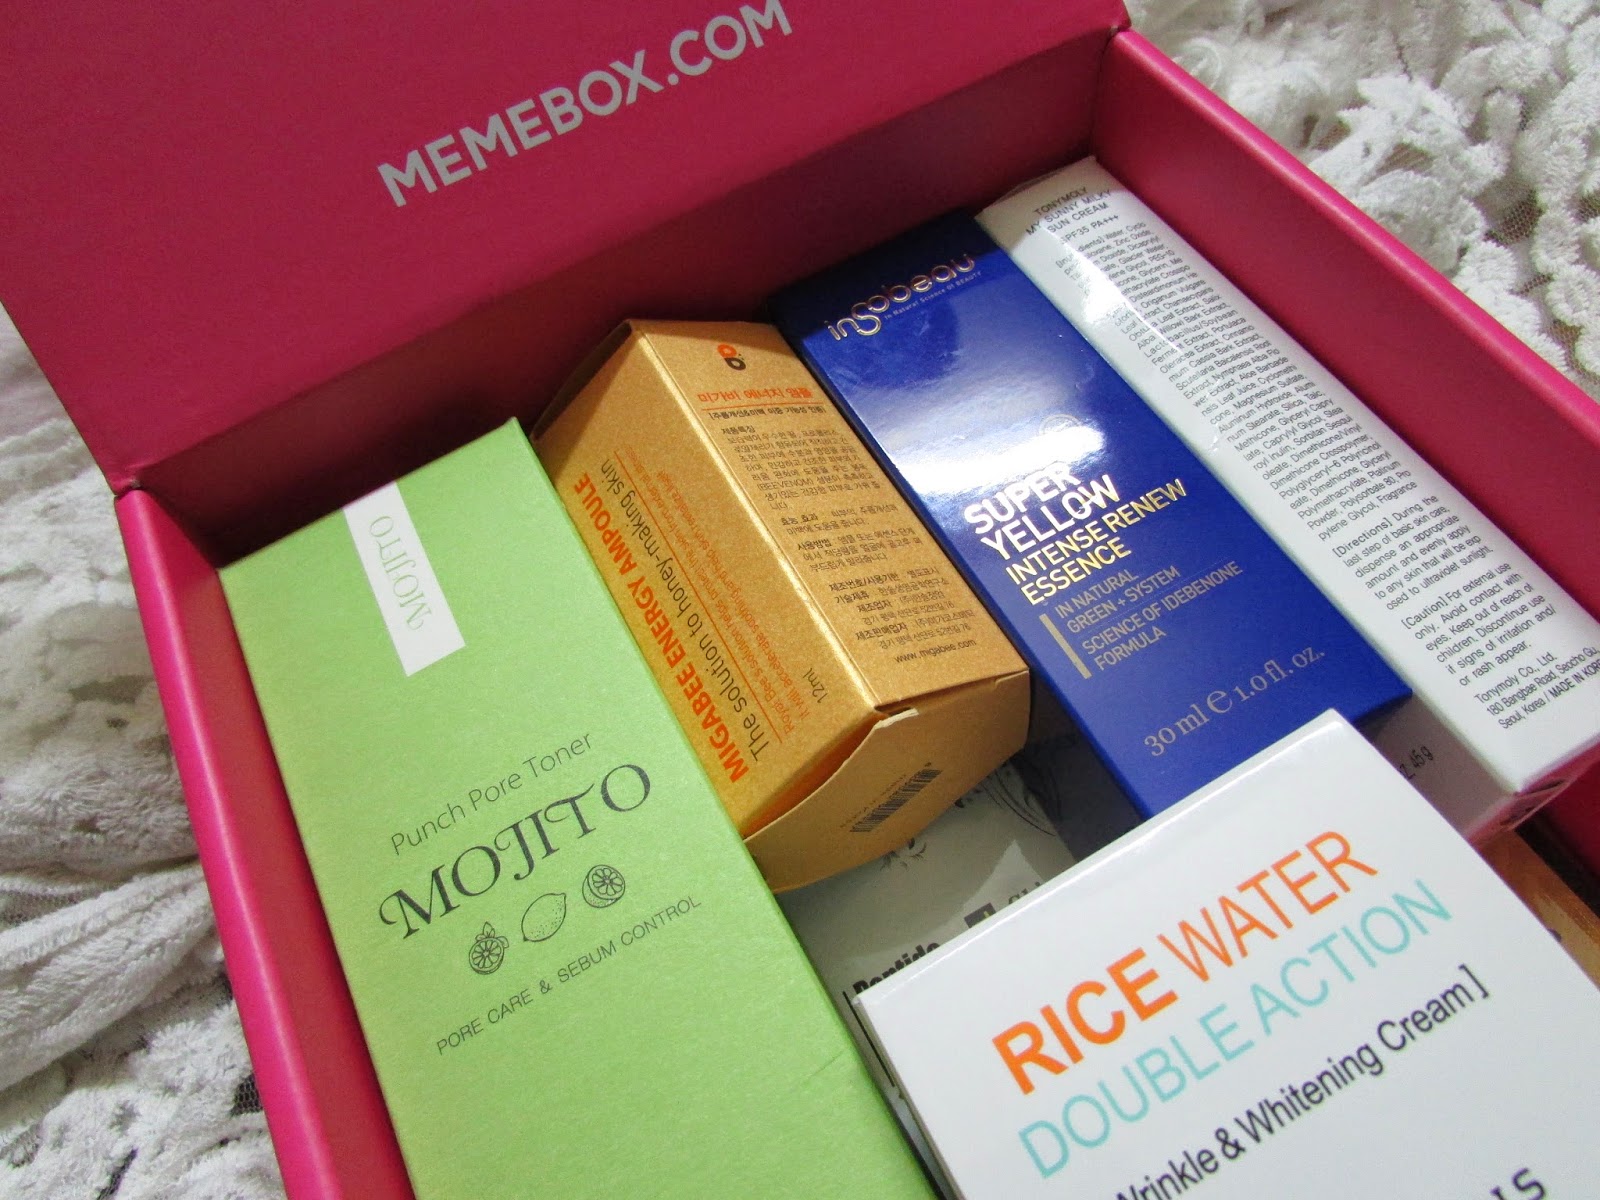 memebox, memebox Step By Step Skincare box, memebox coupon, memebox coupon code, memebox india, memebox review, memebox review india, memebox shipping, memebox shipping cost, memebox unboxing, memebox unboxing and review, Mizon Alchol Toner Mojito, Ingobeau Super Yellow intense Renew Esssence, Migbee Royal Jelly & Honey Energy Ampoule, She's Uris Rice Water Double Action, Tonymoly My Sunny Milky Sun Cream SPF 35 +++, Taphre Special Care Mask, MemeBox Special #50 Step By Step Skincare Unboxing Review,beauty , fashion,beauty and fashion,beauty blog, fashion blog , indian beauty blog,indian fashion blog, beauty and fashion blog, indian beauty and fashion blog, indian bloggers, indian beauty bloggers, indian fashion bloggers,indian bloggers online, top 10 indian bloggers, top indian bloggers,top 10 fashion bloggers, indian bloggers on blogspot,home remedies, how to